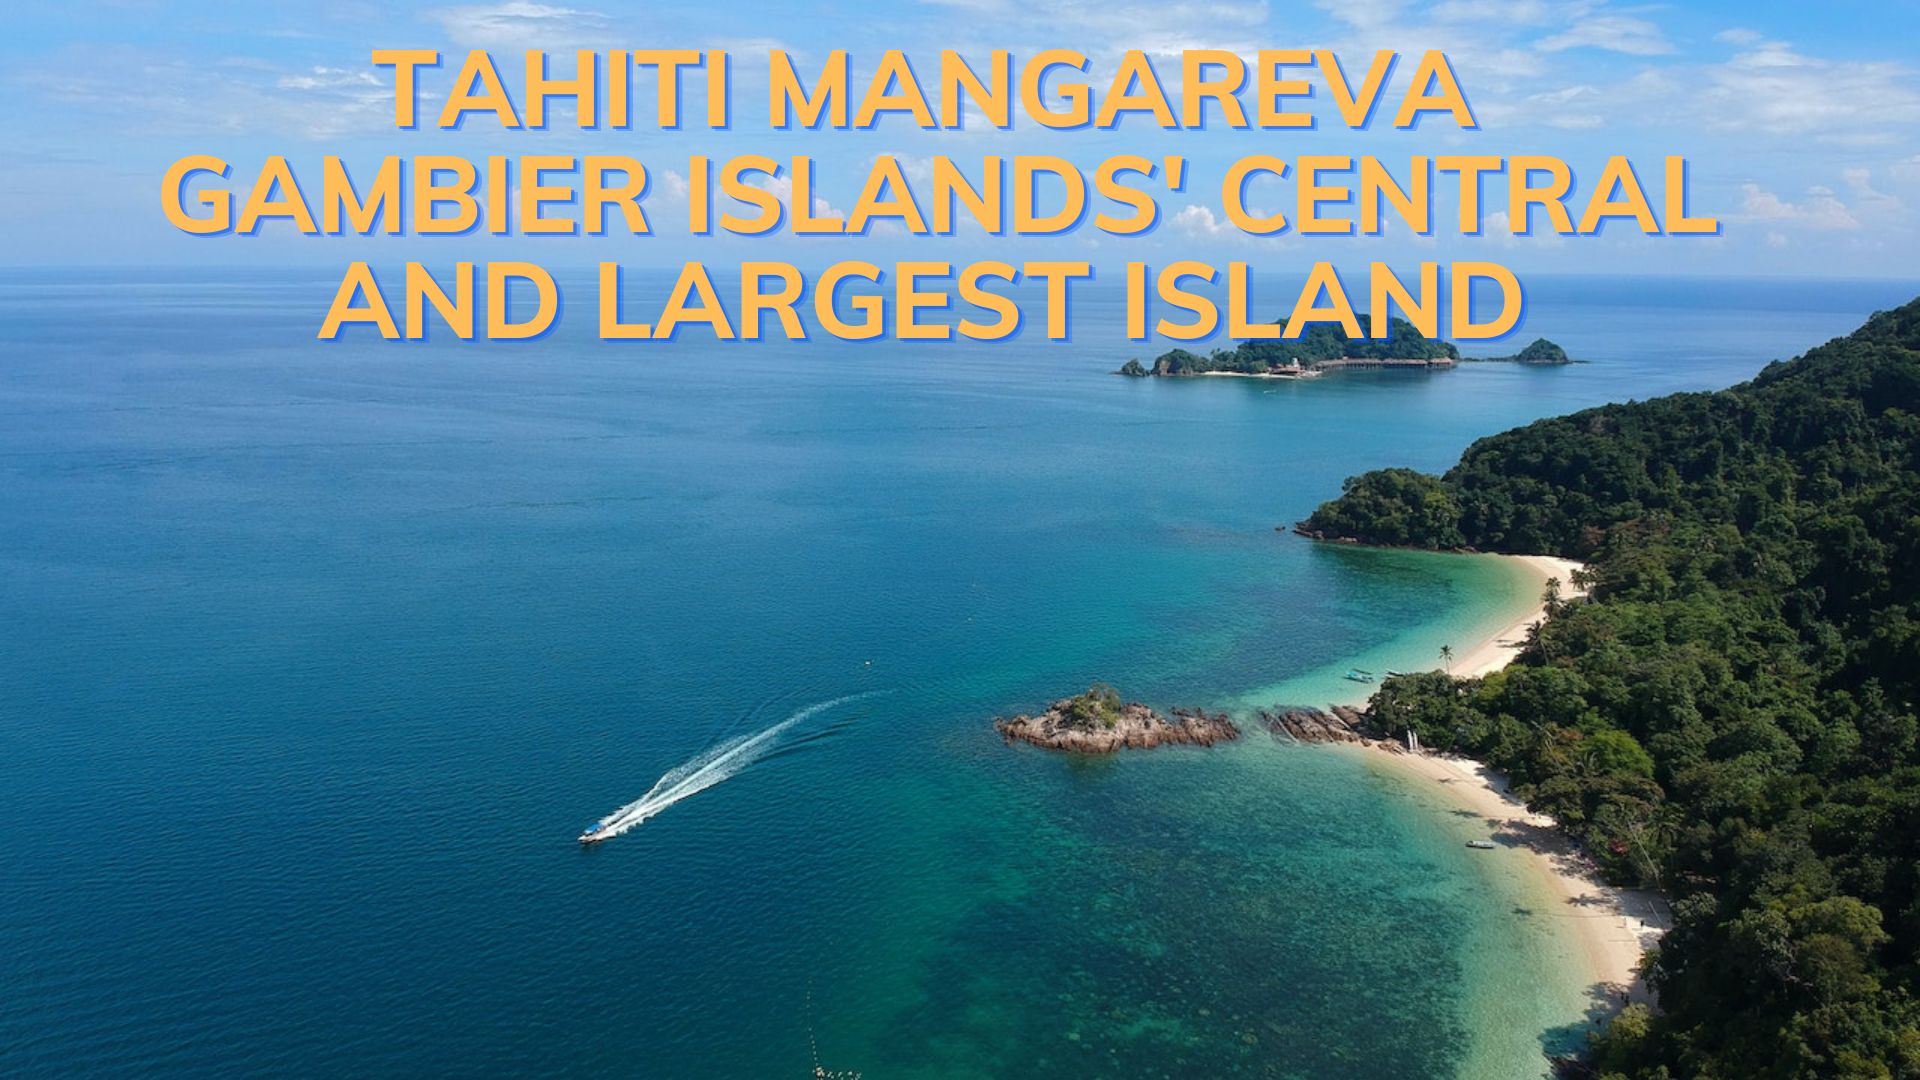 Tahiti Mangareva - Gambier Islands' Central And Largest Island